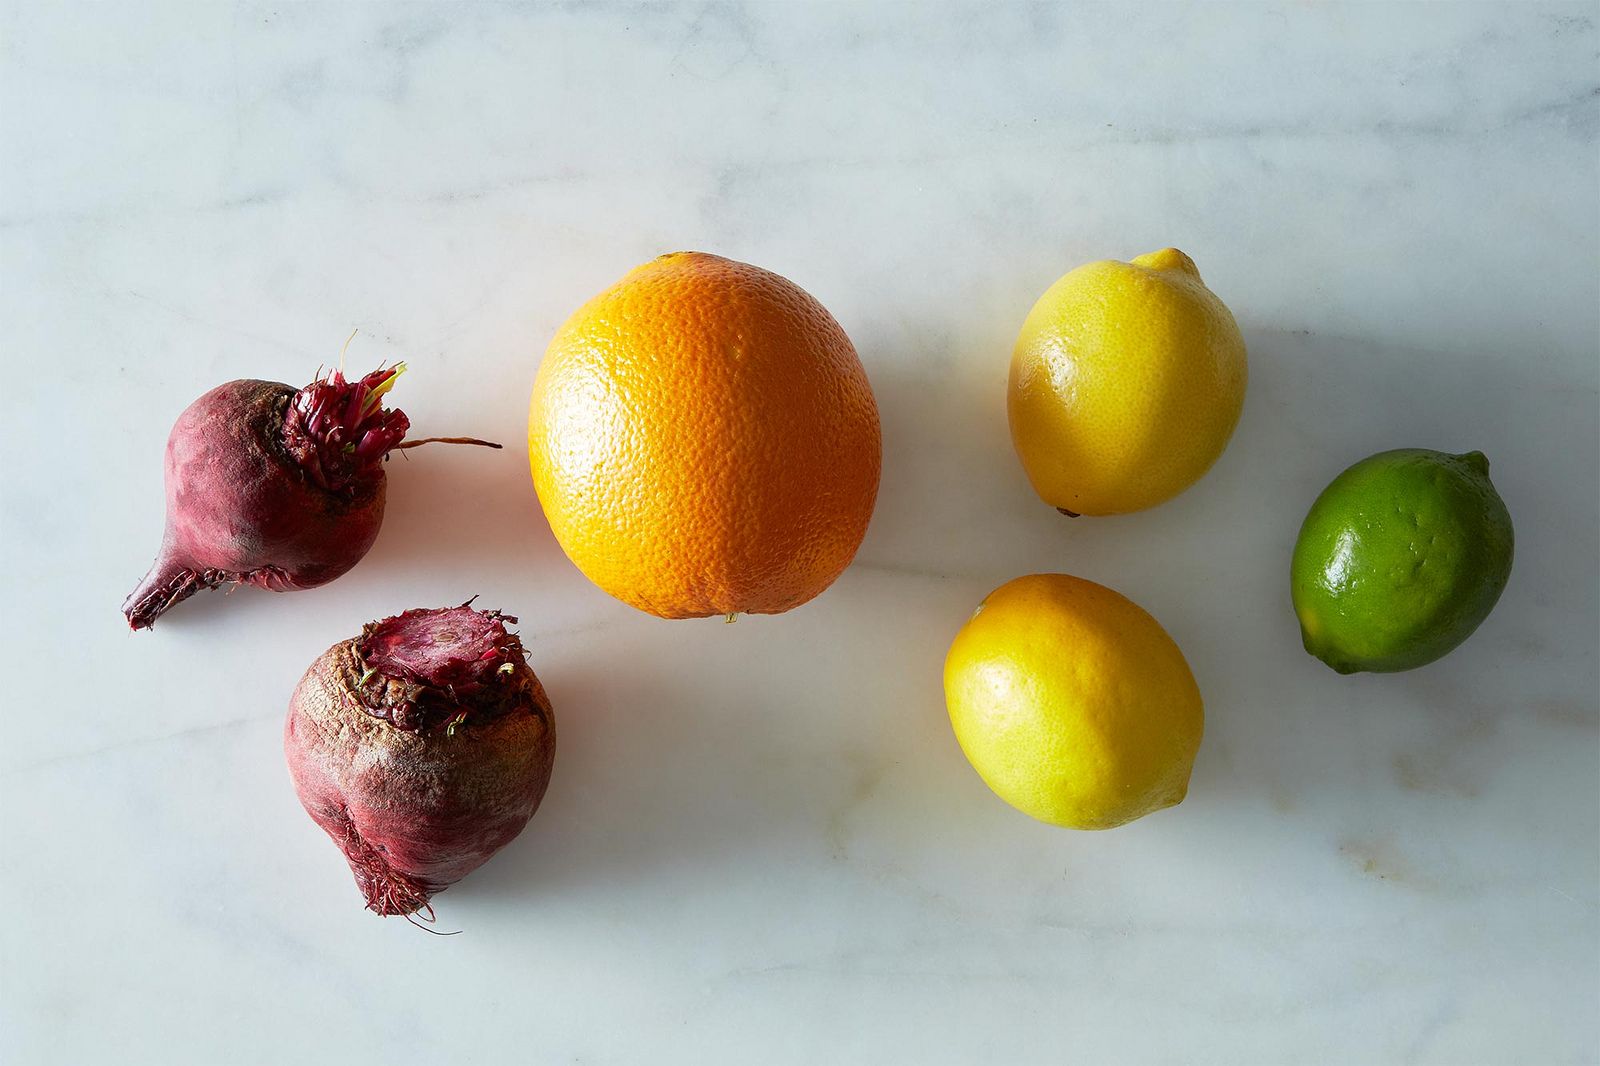 How to Make Juice Without a Juicer